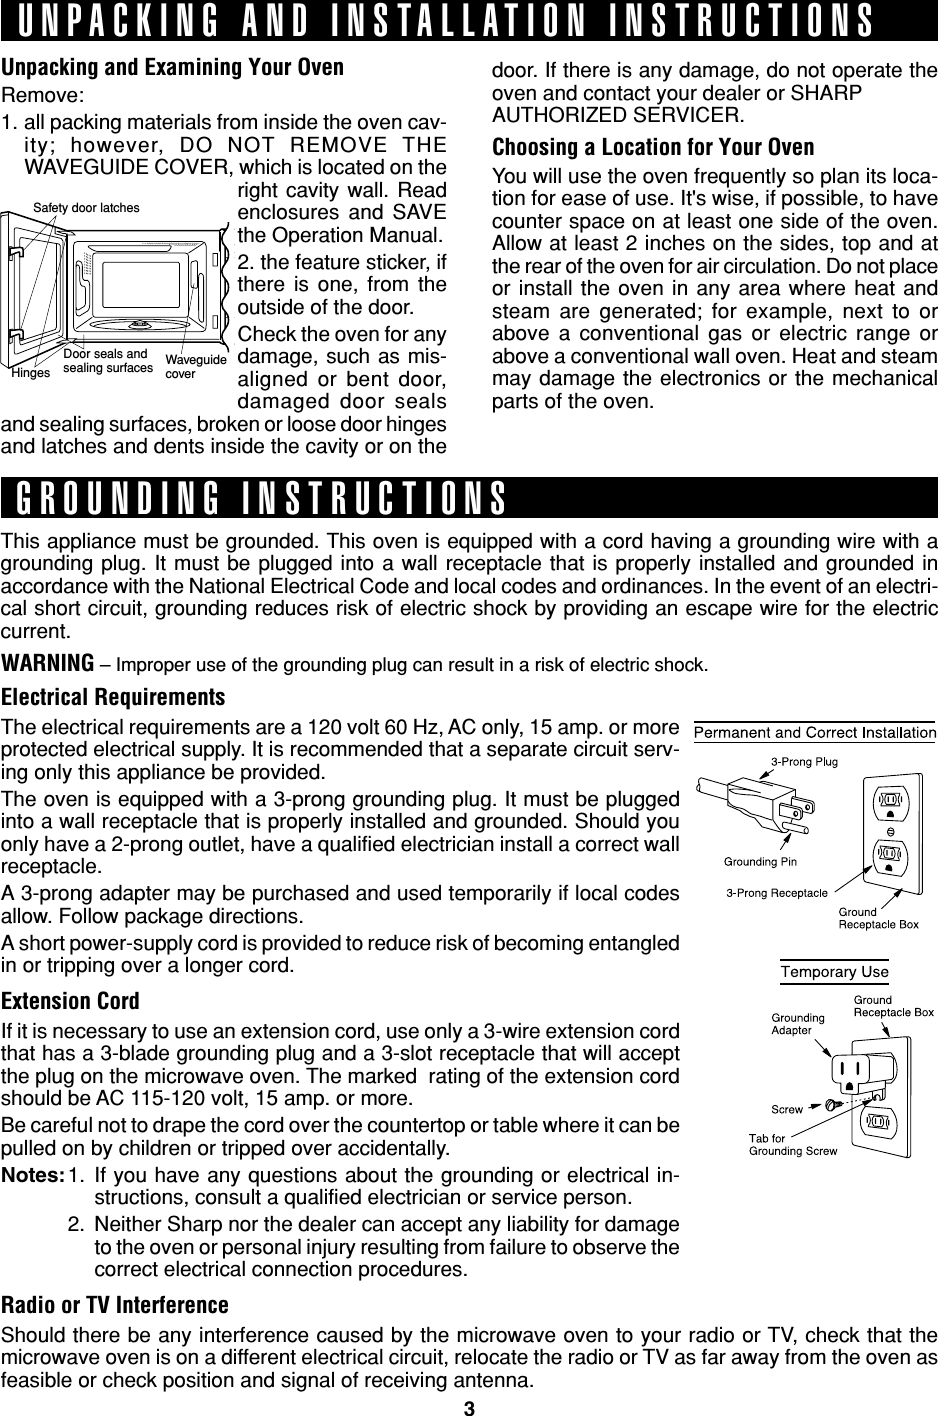 3Safety door latchesHingesDoor seals andsealing surfaces WaveguidecoverUnpacking and Examining Your OvenRemove:1. all packing materials from inside the oven cav-ity; however, DO NOT REMOVE THEWAVEGUIDE COVER, which is located on theright cavity wall. Readenclosures and SAVEthe Operation Manual.2. the feature sticker, ifthere is one, from theoutside of the door.Check the oven for anydamage, such as mis-aligned or bent door,damaged door sealsand sealing surfaces, broken or loose door hingesand latches and dents inside the cavity or on theThis appliance must be grounded. This oven is equipped with a cord having a grounding wire with agrounding plug. It must be plugged into a wall receptacle that is properly installed and grounded inaccordance with the National Electrical Code and local codes and ordinances. In the event of an electri-cal short circuit, grounding reduces risk of electric shock by providing an escape wire for the electriccurrent.WARNING – Improper use of the grounding plug can result in a risk of electric shock.Electrical RequirementsThe electrical requirements are a 120 volt 60 Hz, AC only, 15 amp. or moreprotected electrical supply. It is recommended that a separate circuit serv-ing only this appliance be provided.The oven is equipped with a 3-prong grounding plug. It must be pluggedinto a wall receptacle that is properly installed and grounded. Should youonly have a 2-prong outlet, have a qualified electrician install a correct wallreceptacle.A 3-prong adapter may be purchased and used temporarily if local codesallow. Follow package directions.A short power-supply cord is provided to reduce risk of becoming entangledin or tripping over a longer cord.Extension CordIf it is necessary to use an extension cord, use only a 3-wire extension cordthat has a 3-blade grounding plug and a 3-slot receptacle that will acceptthe plug on the microwave oven. The marked  rating of the extension cordshould be AC 115-120 volt, 15 amp. or more.Be careful not to drape the cord over the countertop or table where it can bepulled on by children or tripped over accidentally.Notes:1. If you have any questions about the grounding or electrical in-structions, consult a qualified electrician or service person.2. Neither Sharp nor the dealer can accept any liability for damageto the oven or personal injury resulting from failure to observe thecorrect electrical connection procedures.Radio or TV InterferenceShould there be any interference caused by the microwave oven to your radio or TV, check that themicrowave oven is on a different electrical circuit, relocate the radio or TV as far away from the oven asfeasible or check position and signal of receiving antenna.UNPACKING AND INSTALLATION INSTRUCTIONSGROUNDING INSTRUCTIONSdoor. If there is any damage, do not operate theoven and contact your dealer or SHARPAUTHORIZED SERVICER.Choosing a Location for Your OvenYou will use the oven frequently so plan its loca-tion for ease of use. It&apos;s wise, if possible, to havecounter space on at least one side of the oven.Allow at least 2 inches on the sides, top and atthe rear of the oven for air circulation. Do not placeor install the oven in any area where heat andsteam are generated; for example, next to orabove a conventional gas or electric range orabove a conventional wall oven. Heat and steammay damage the electronics or the mechanicalparts of the oven.